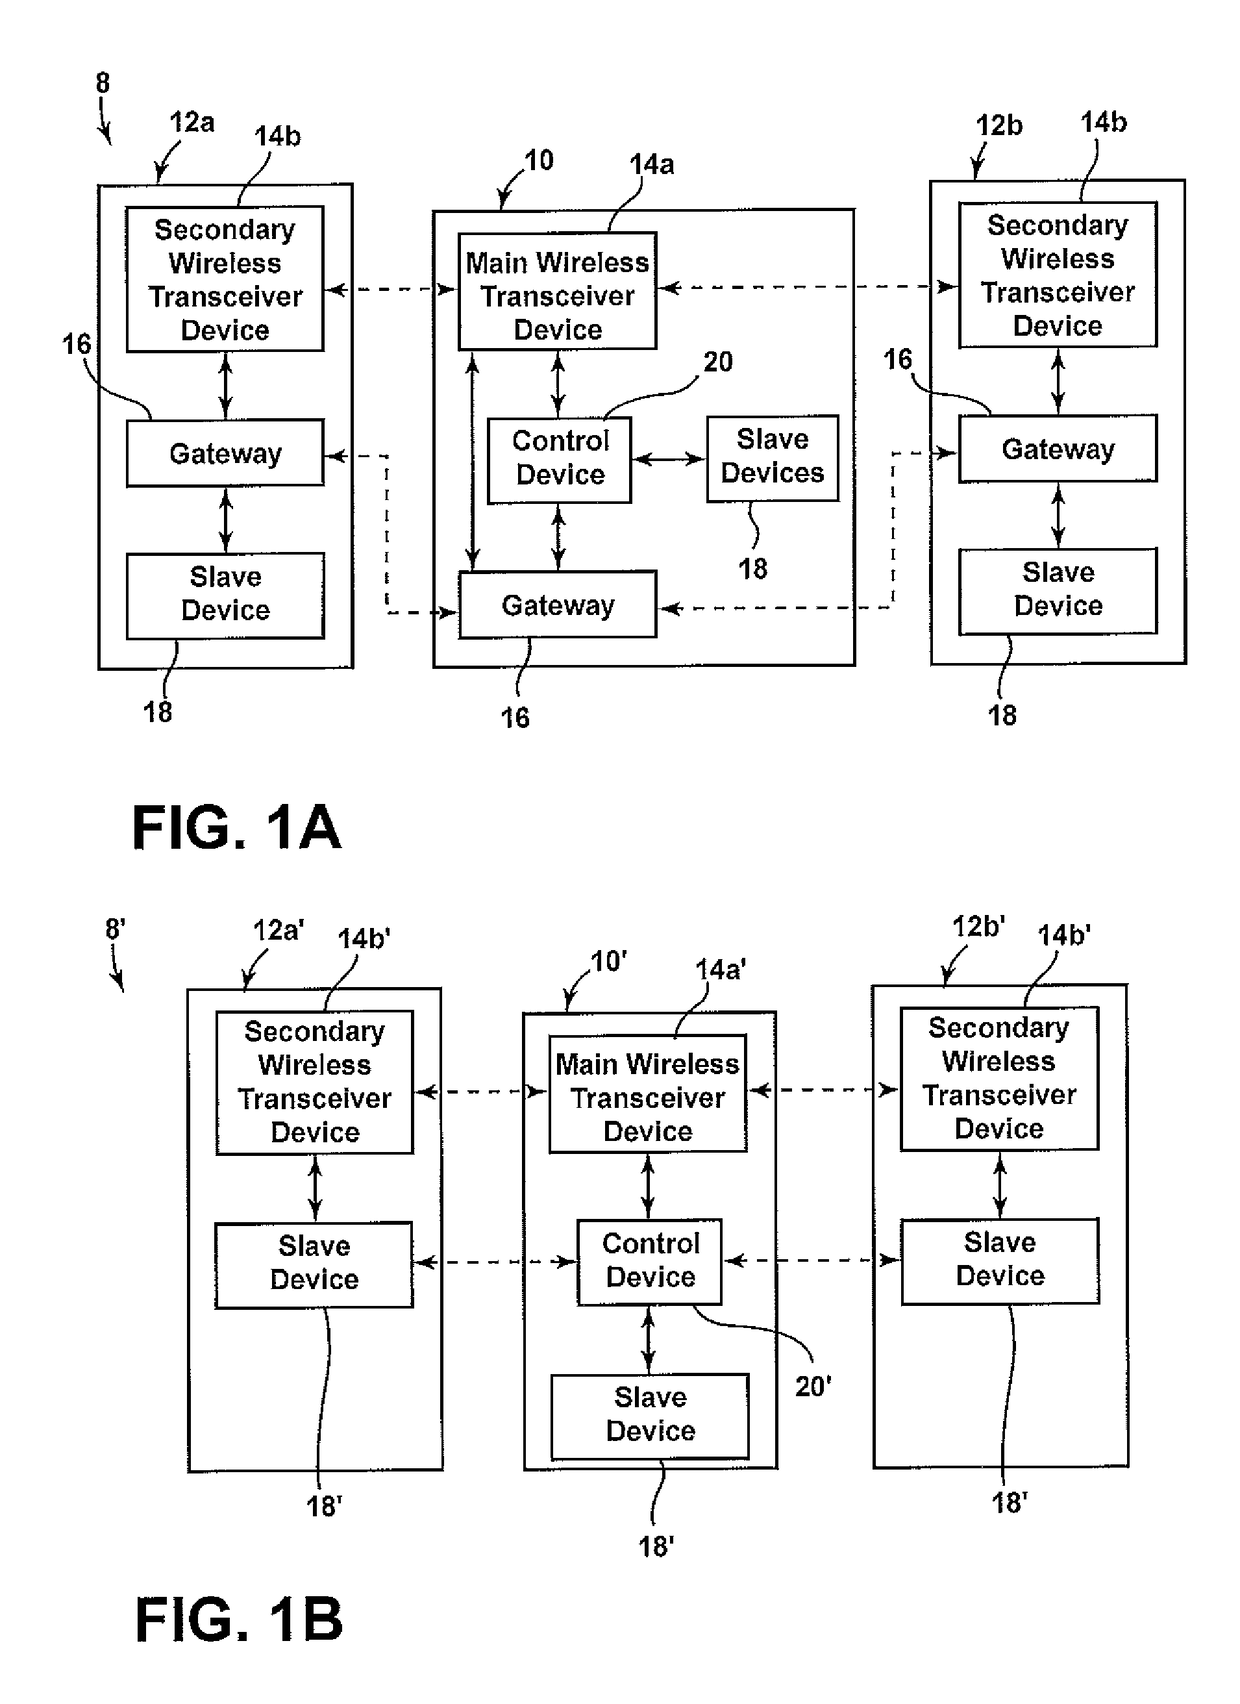 Method of wireless discovery and networking of medical devices in care environments